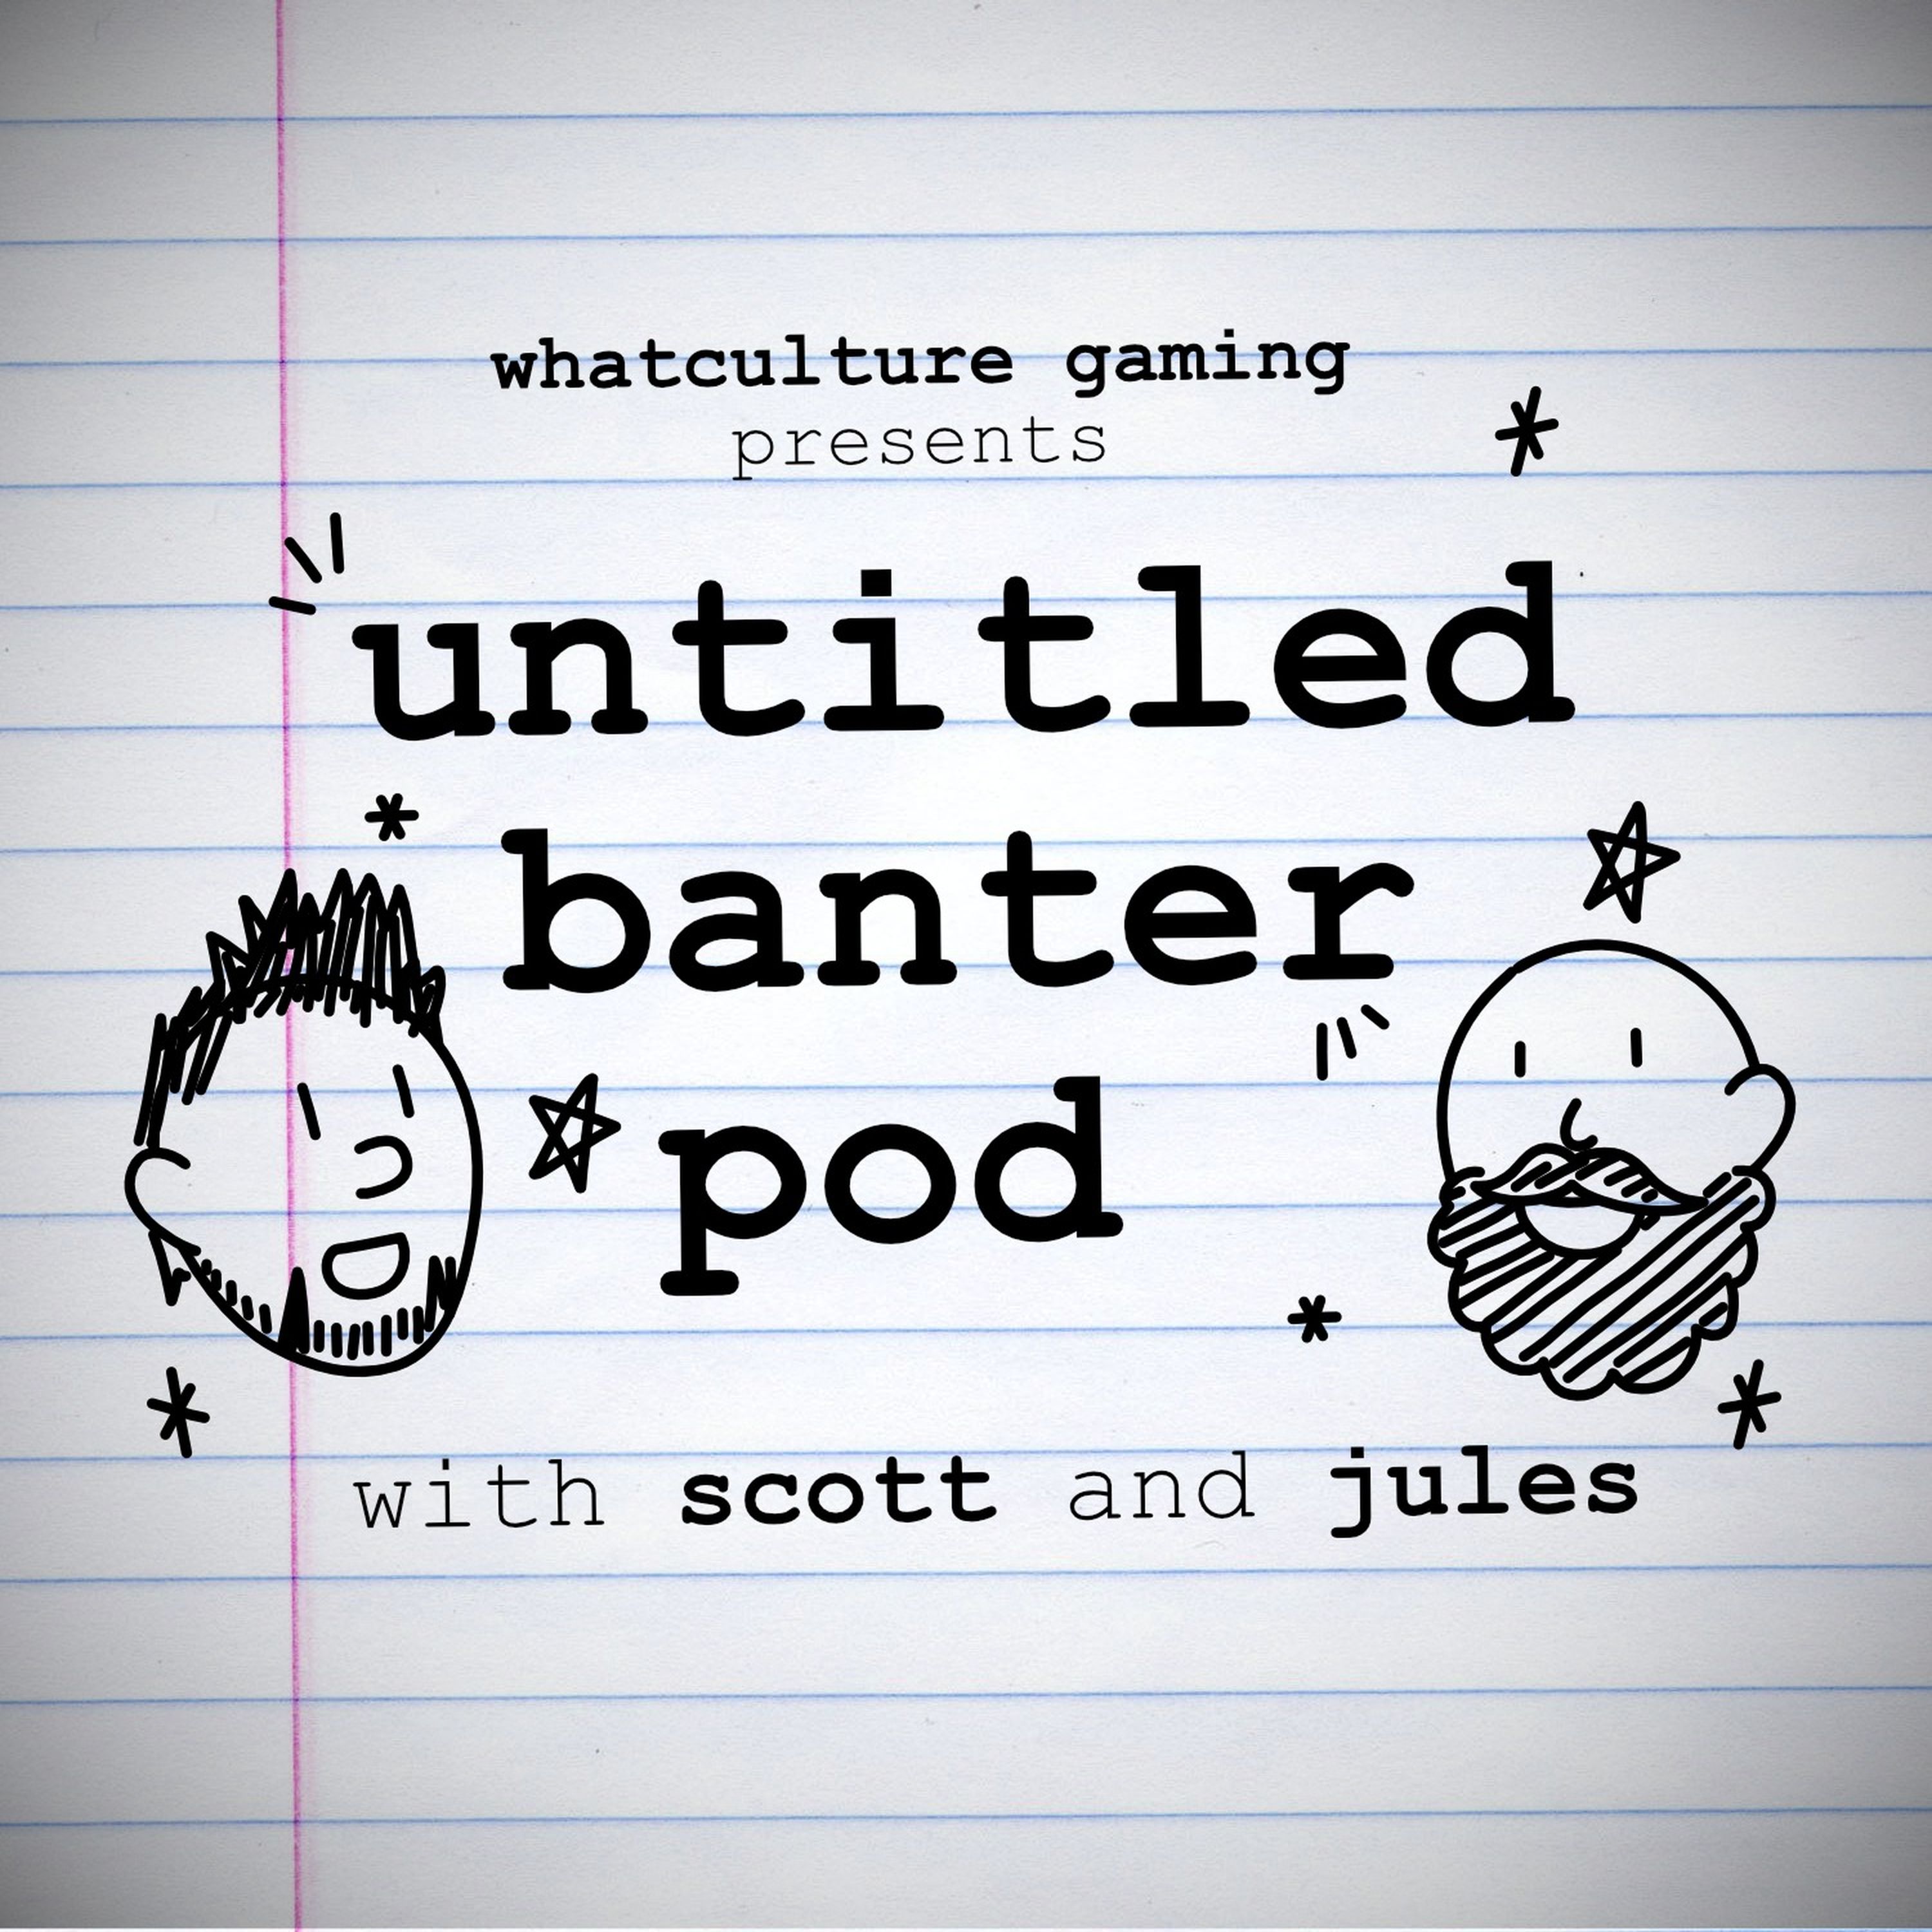 EA’s Star Wars Contract Is TERMINATED, What Happens Next?? – Untitled Banter Pod